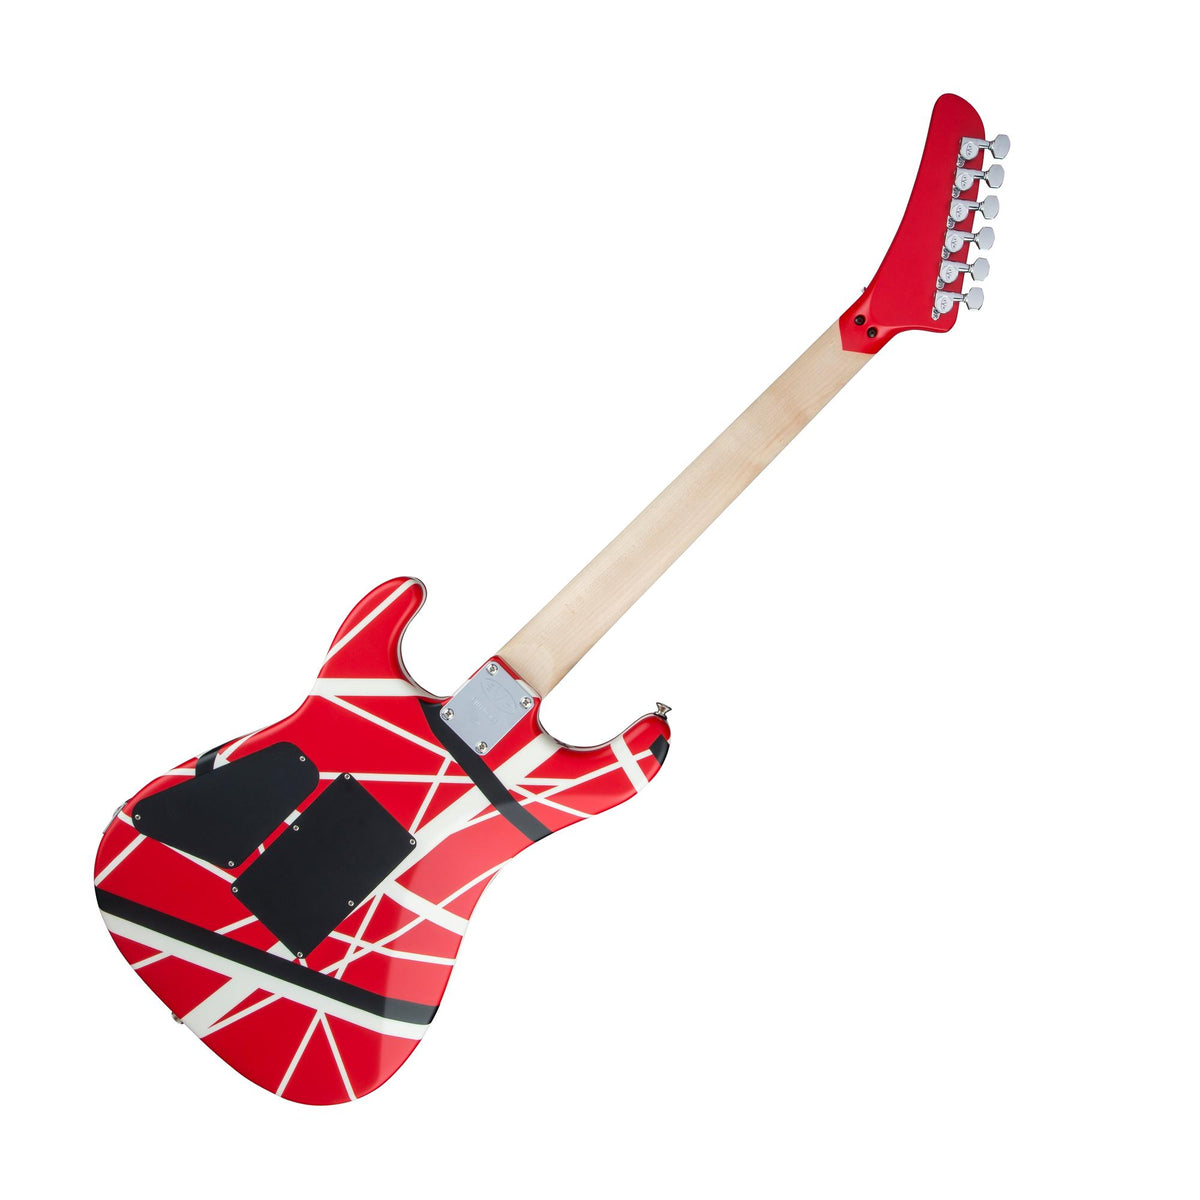 White　and　Electric　EVH　any　Red,　pedals　5150　Series　Striped　genre　Guitar,　Black　guitar　for